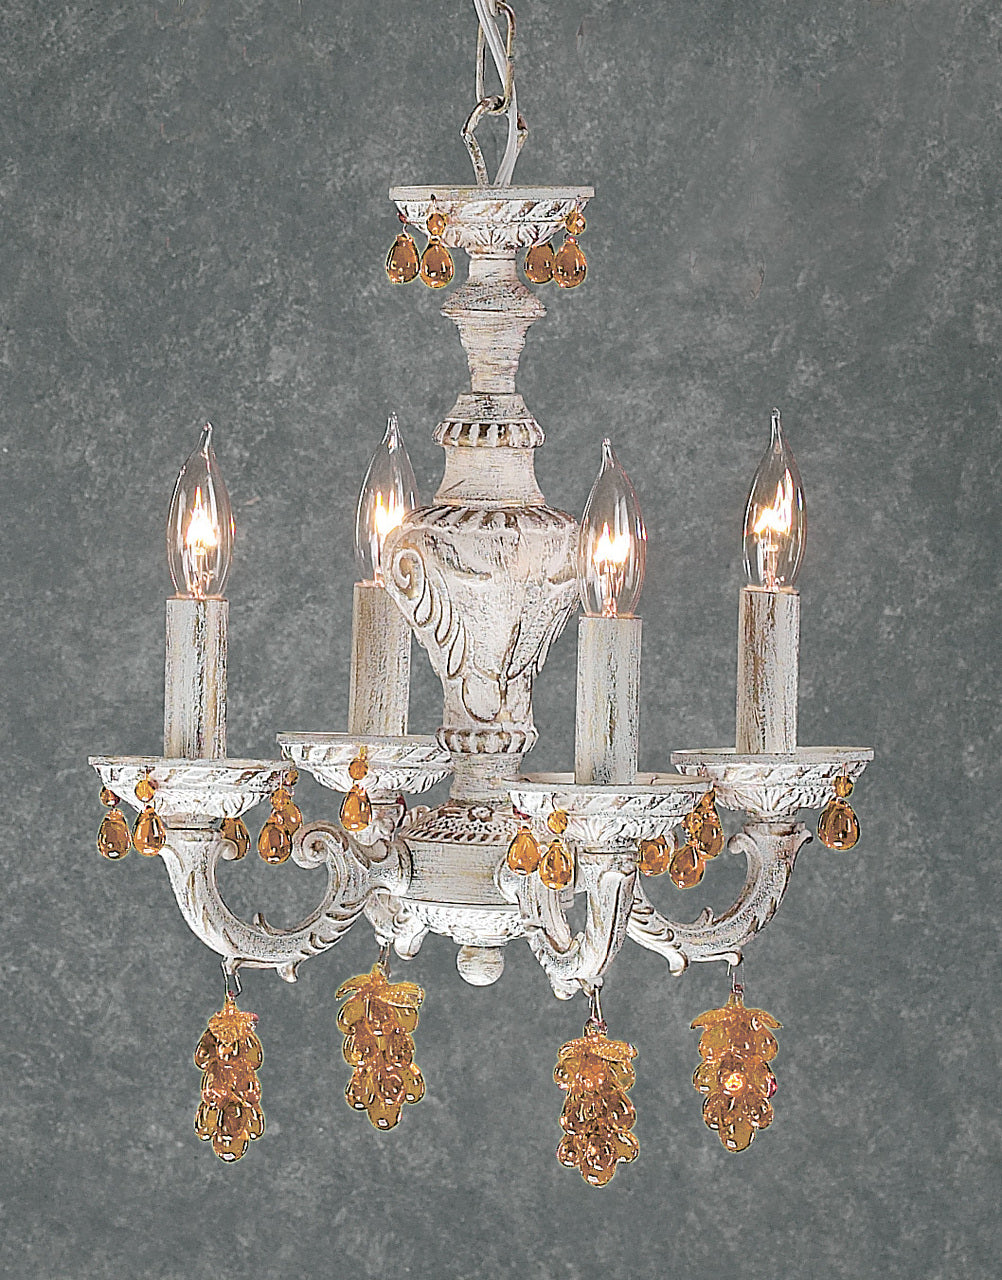 Classic Lighting 8334 AW GCA Gabrielle Crystal Mini Chandelier in Antique White